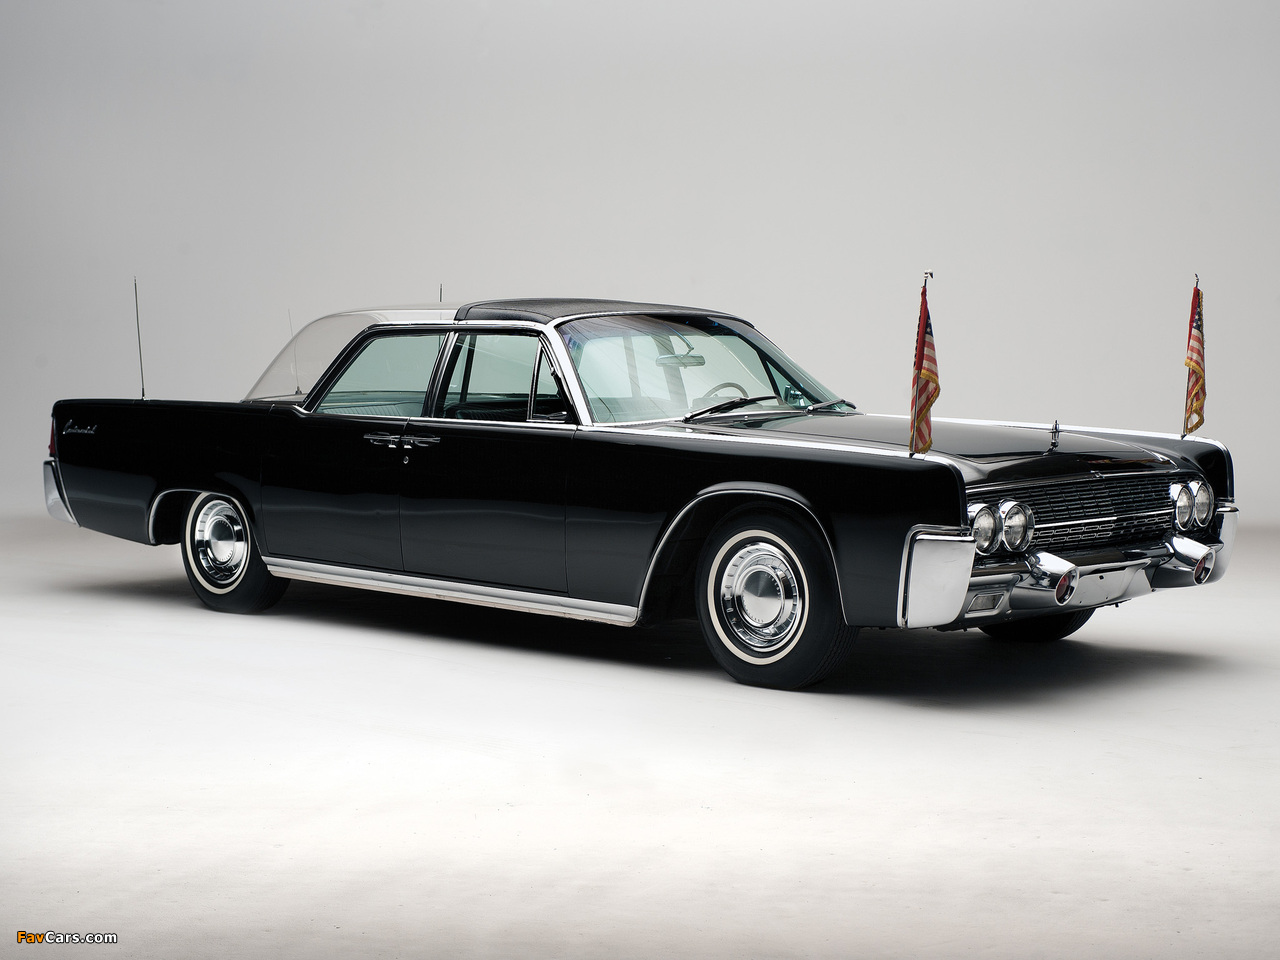 Images of Lincoln Continental Bubbletop Kennedy Limousine 1962 (1280 x 960)